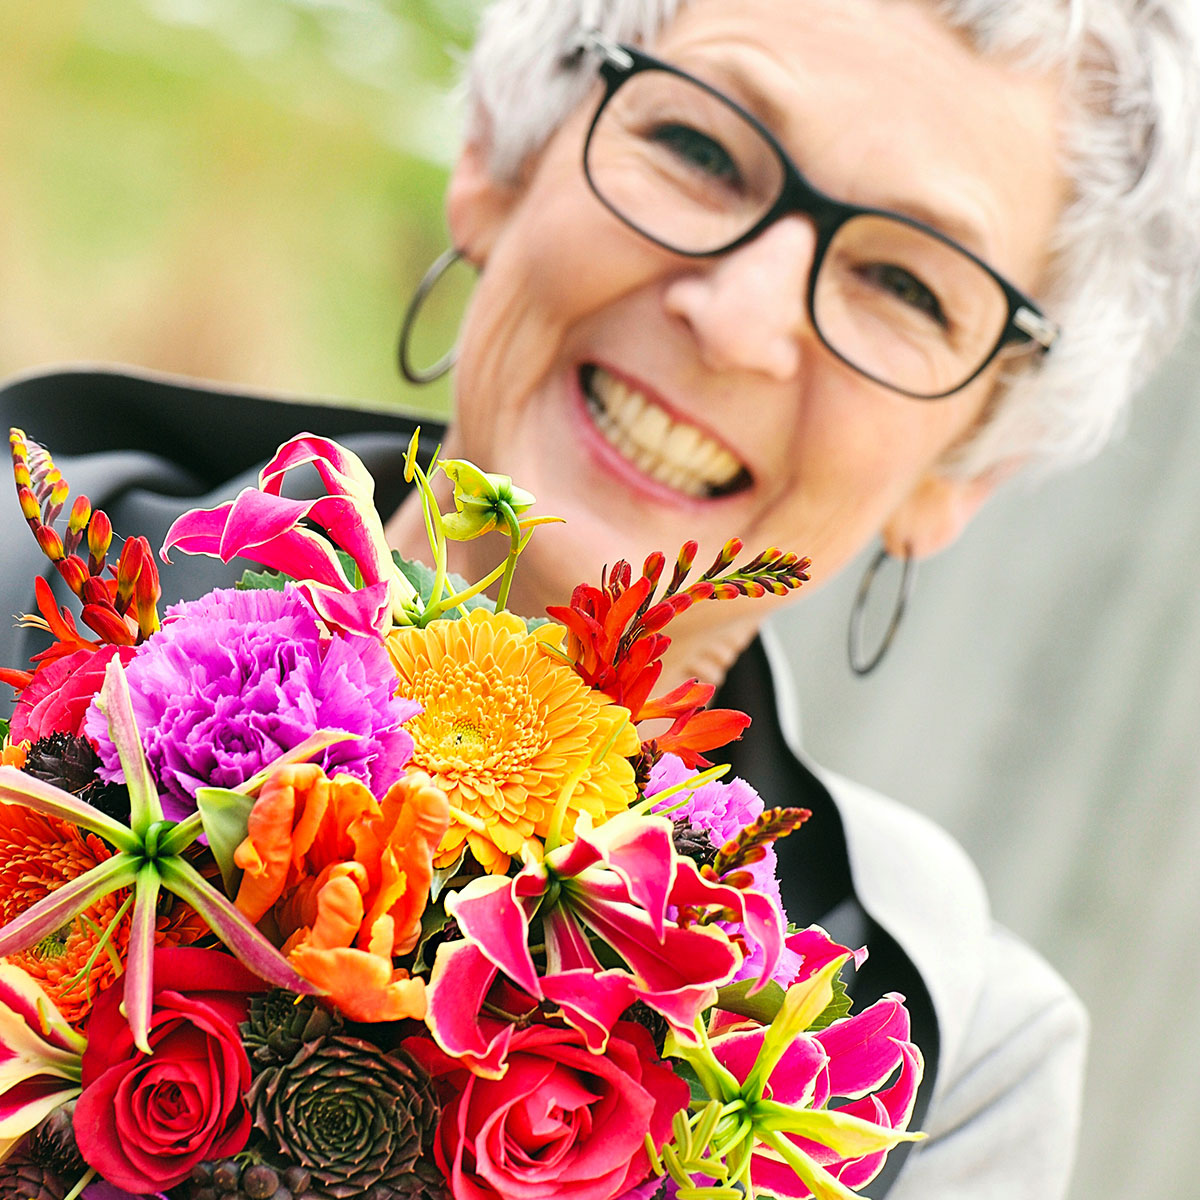 Old lady with gloriosa bouquet